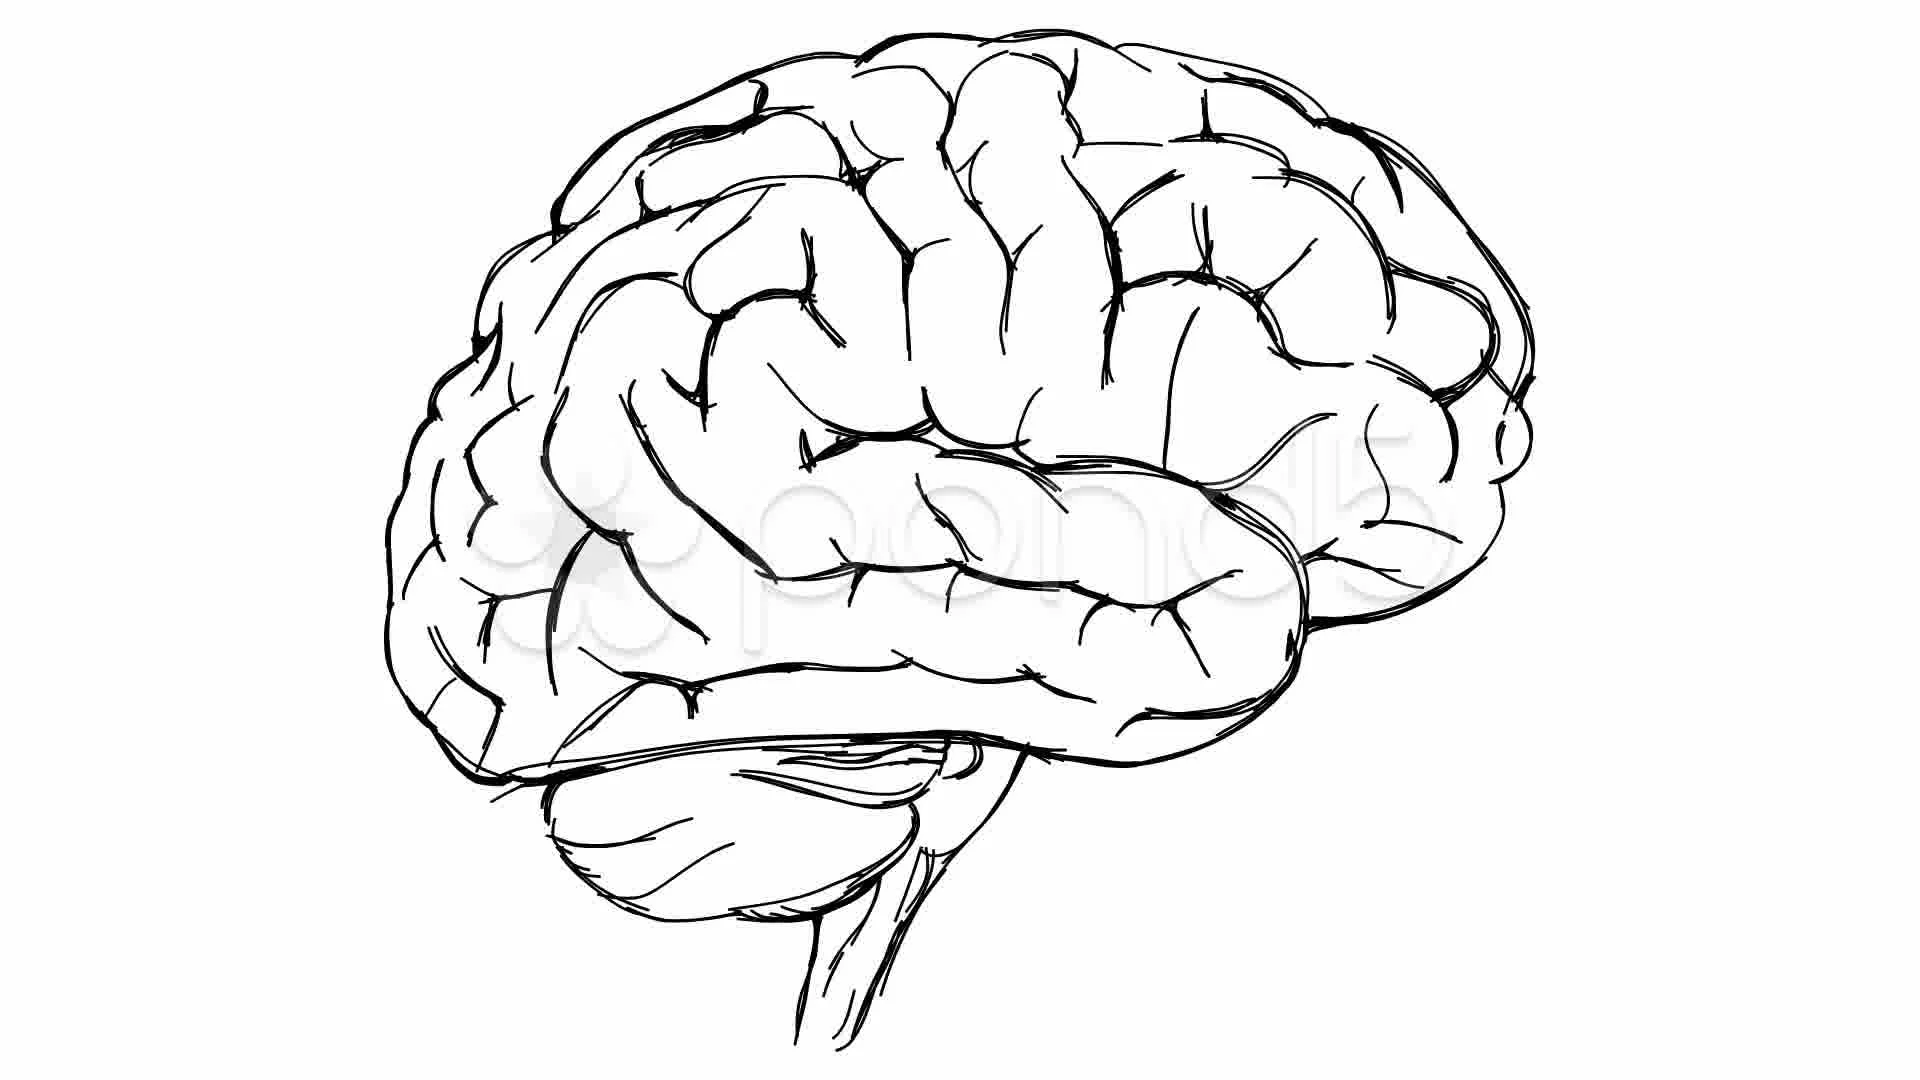 Head Brain Science Drawing High-Res Vector Graphic - Getty Images